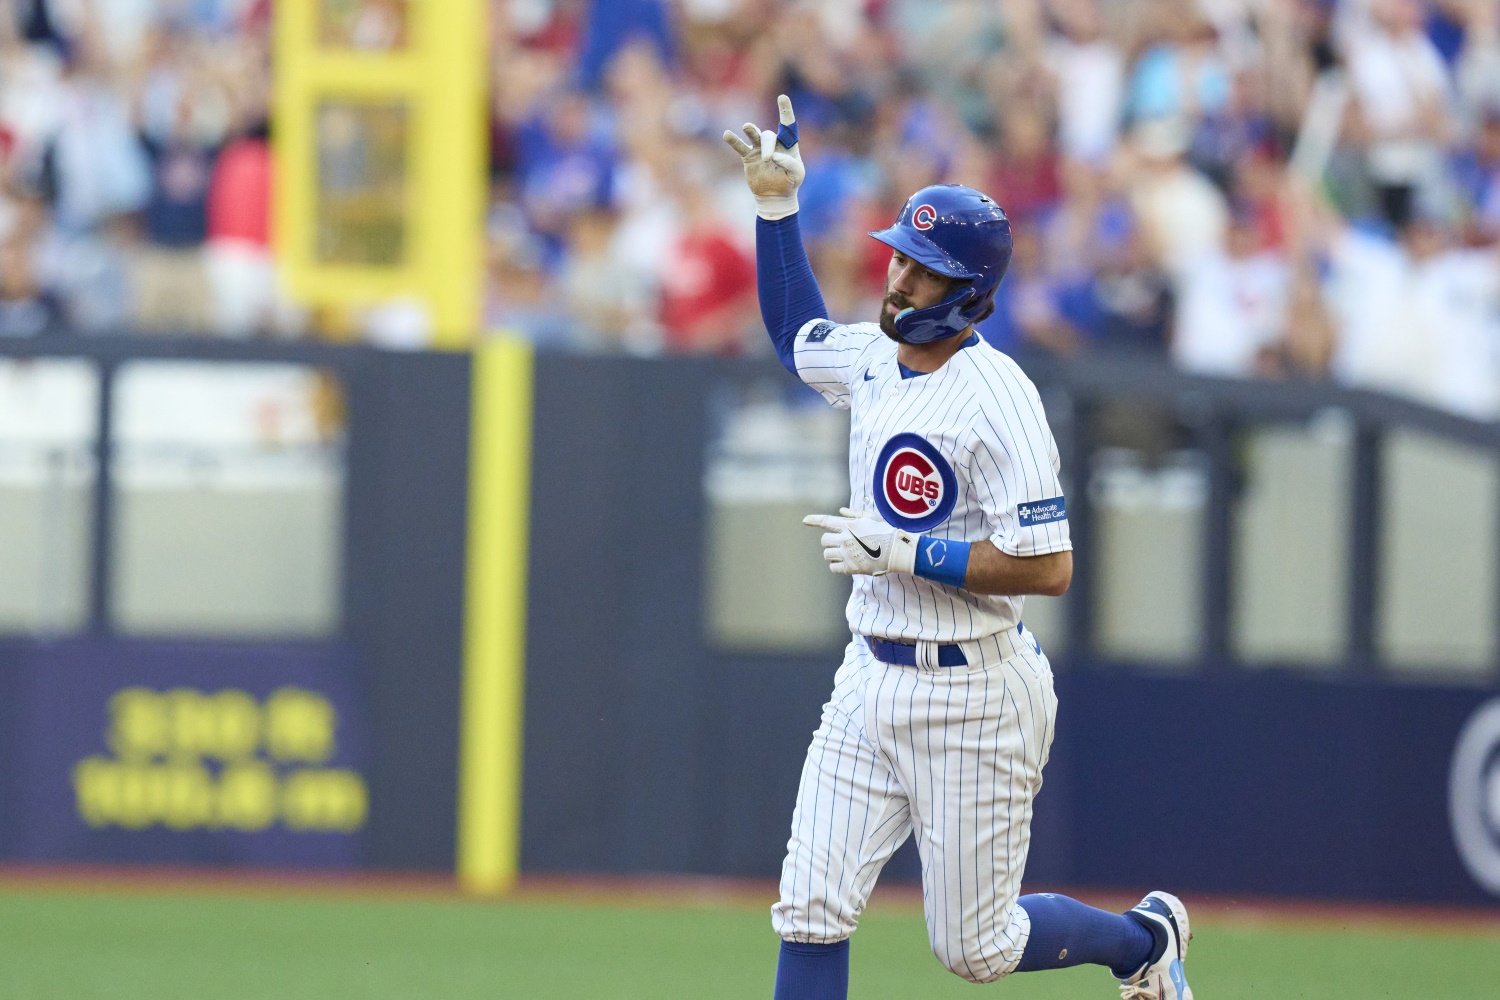 Is the Cubs' Javier Baez the next breakout baseball star? We may